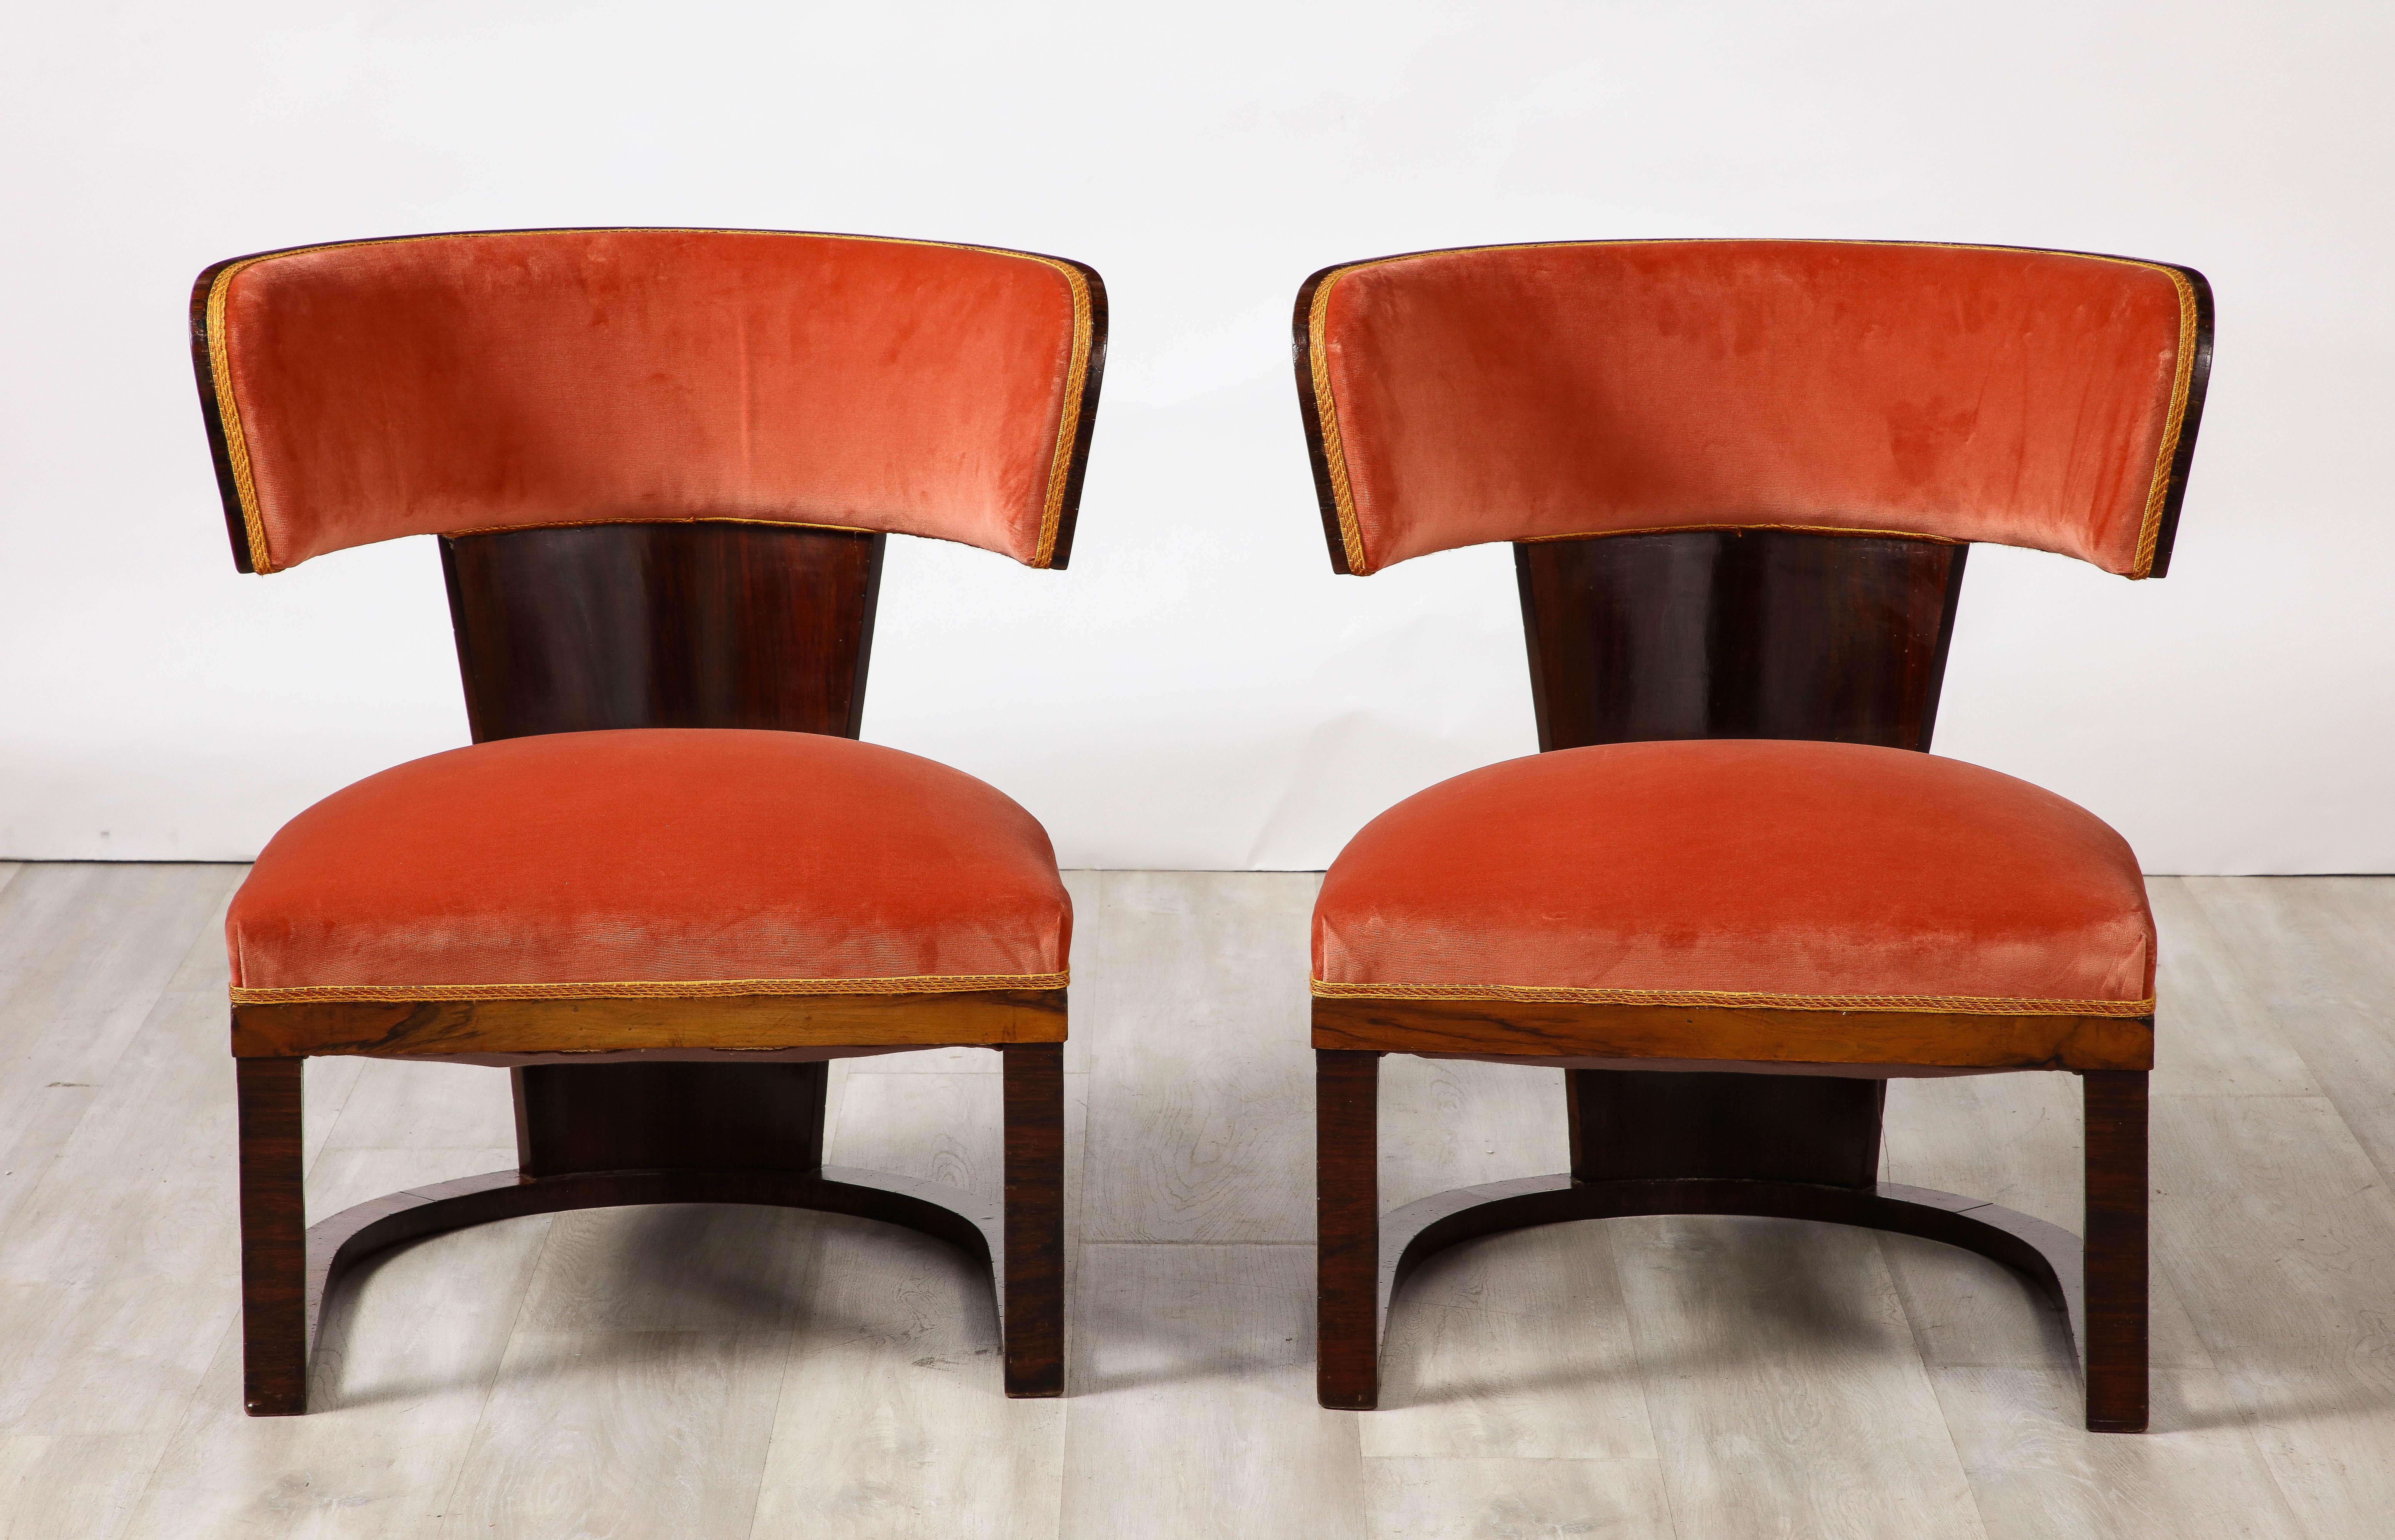 A rare pair of side /slipper chairs designed by Ernesto La Padula from the Italian Art Deco period, circa 1930.  The design can also be described as being  from the Italian Rationalist period (an architectural current that developed in Italy in the